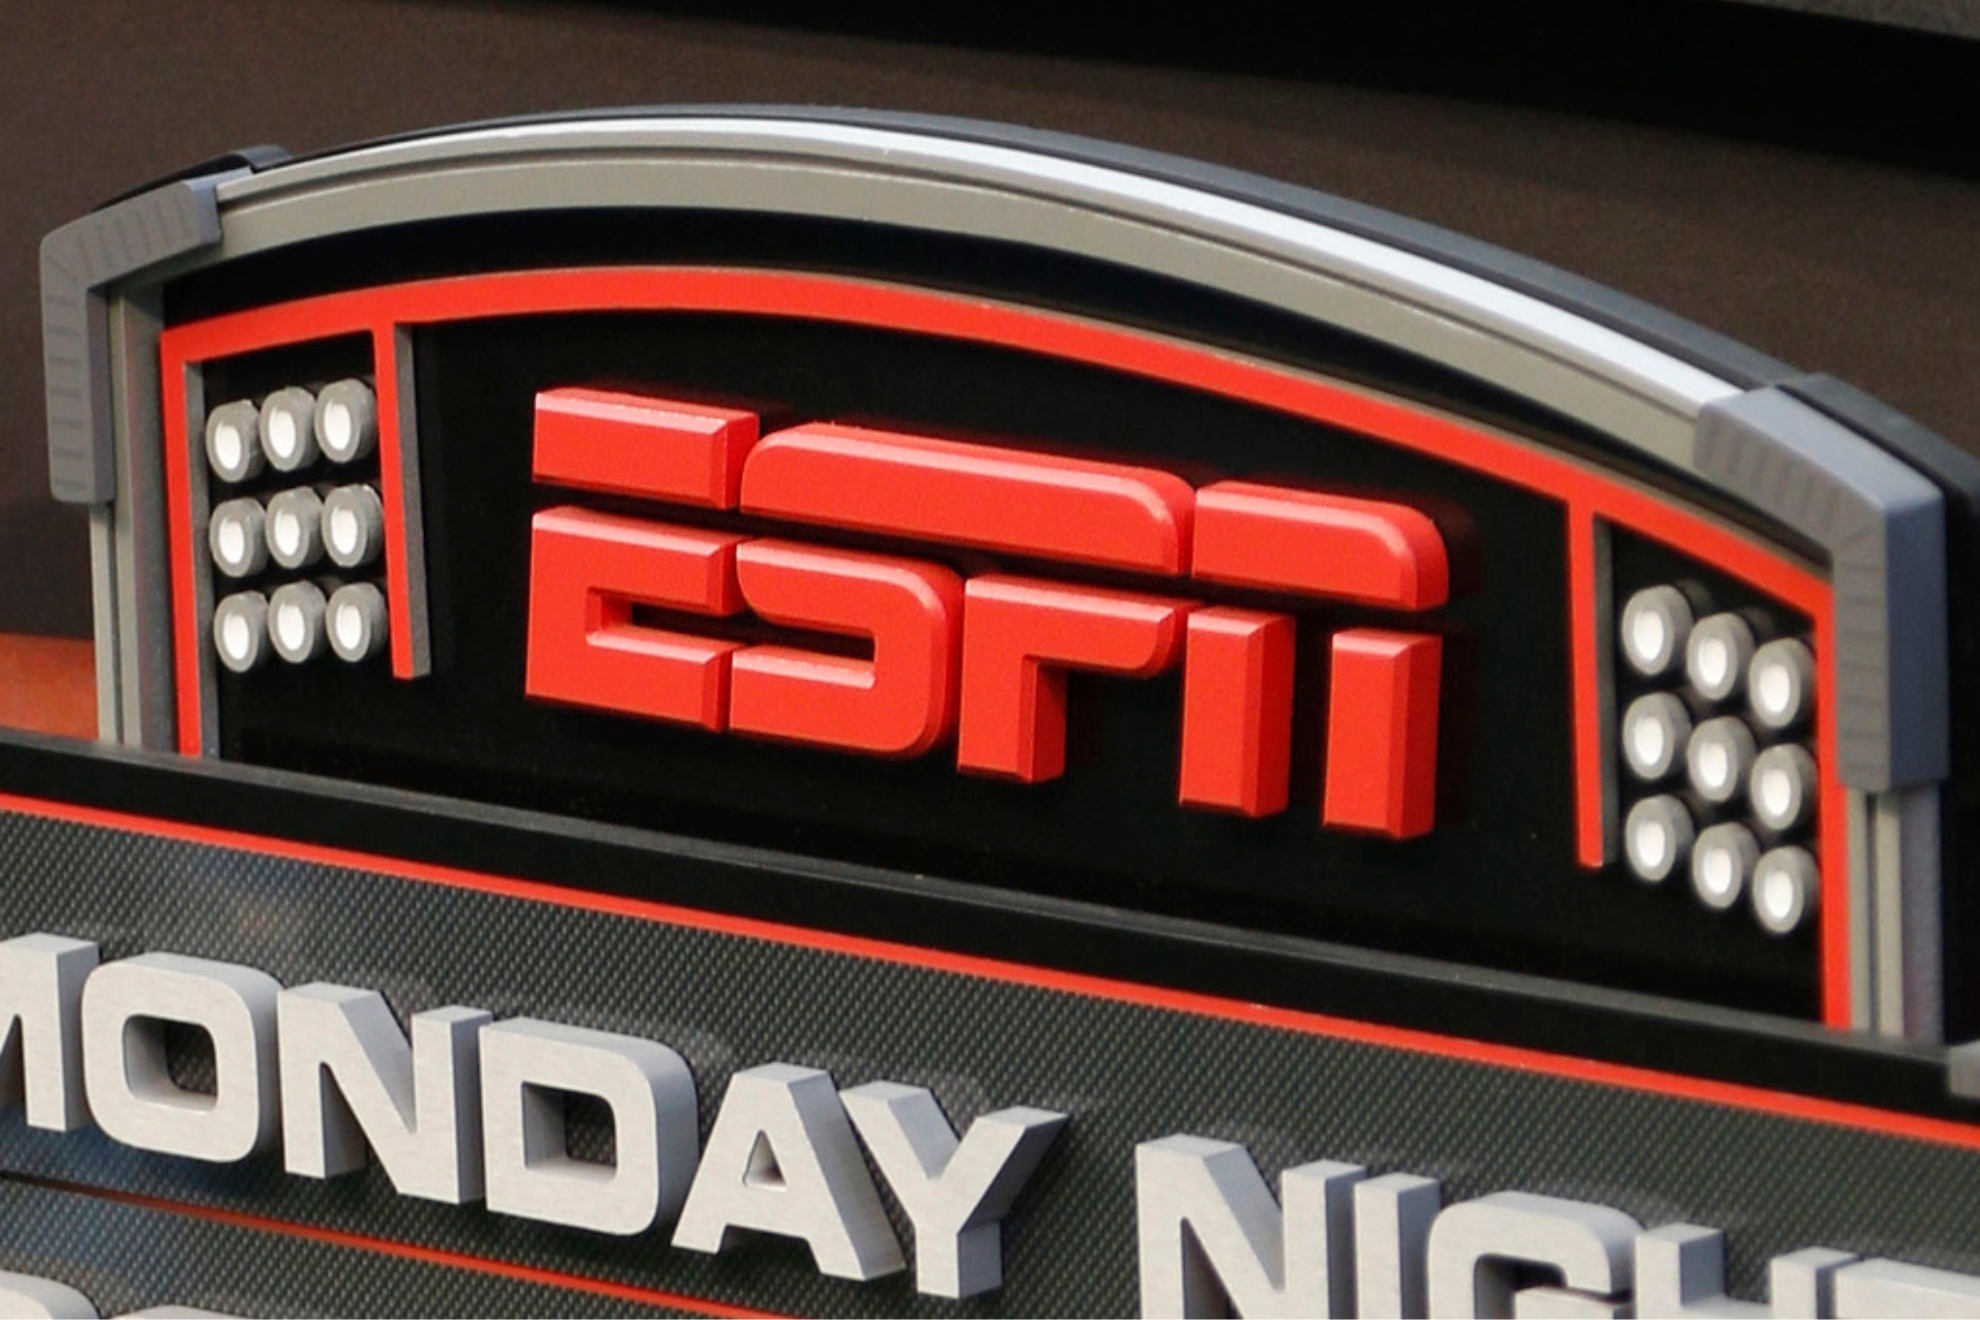 ESPN will broadcast multiple MNF doubleheaders this season